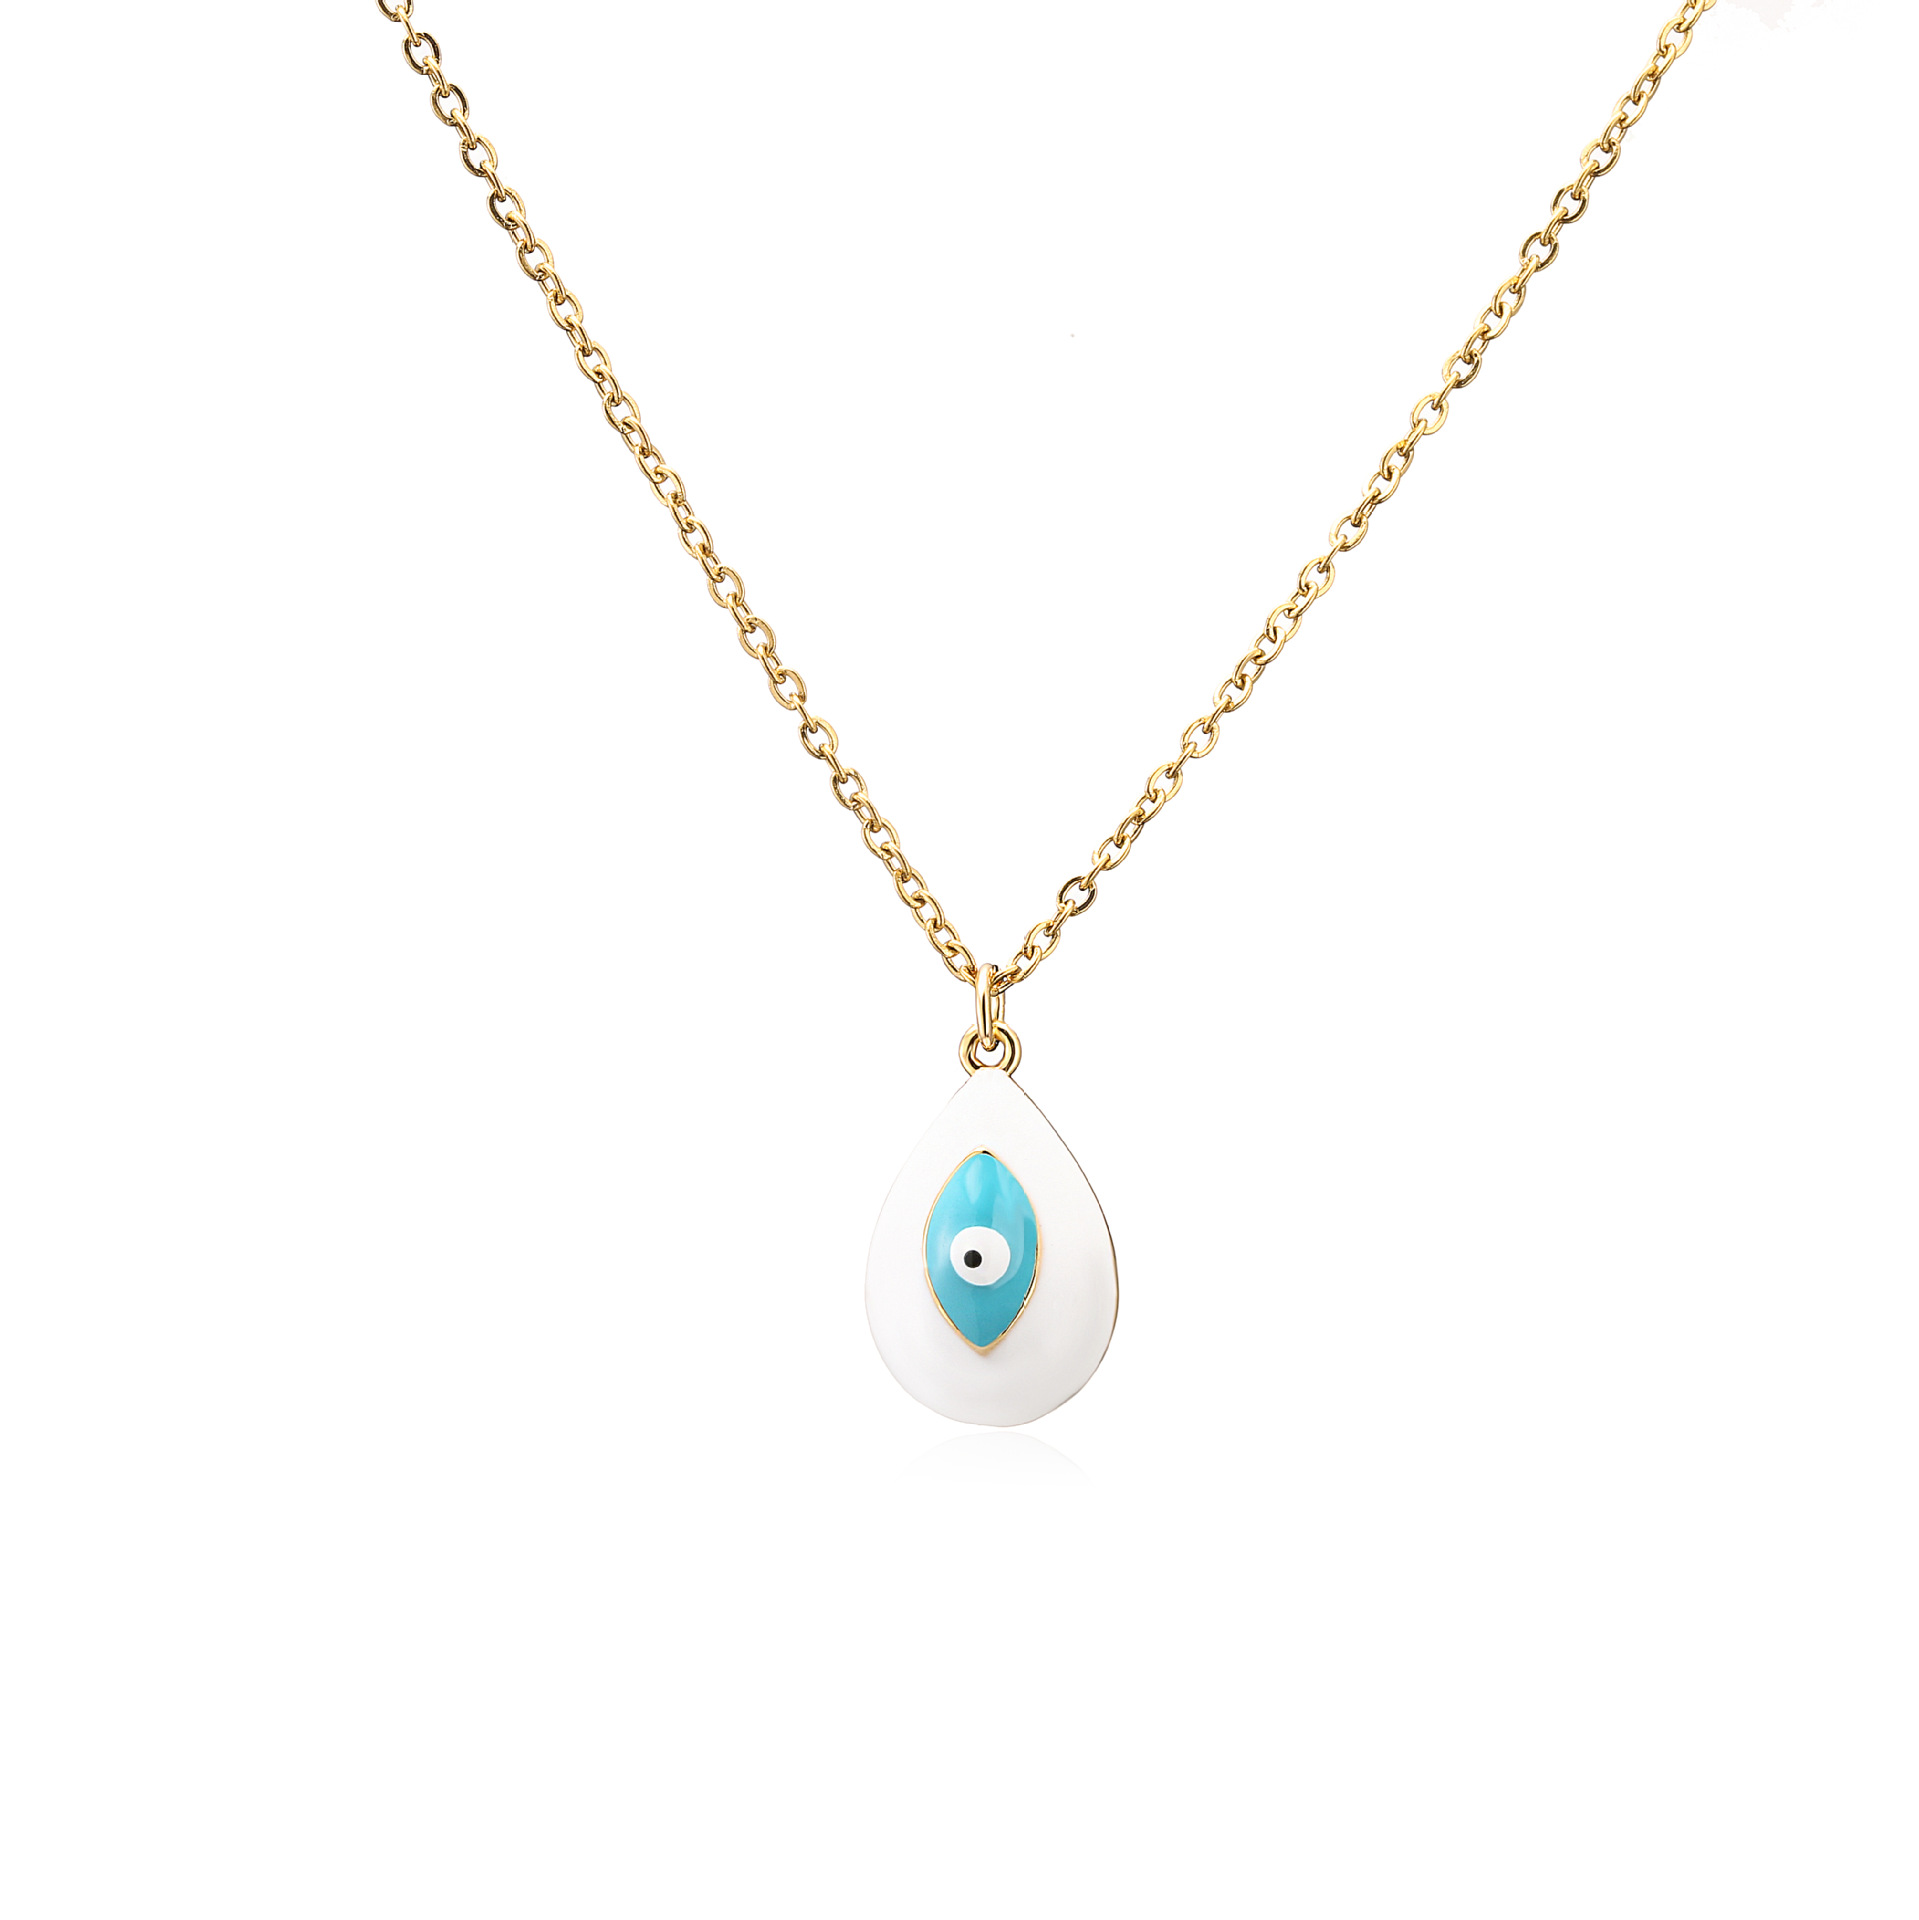 Hecheng Ornament Colorful Oil Necklace Drop Shape Eye Pendant Necklace 18K Gold Plated OShaped Chainpicture5